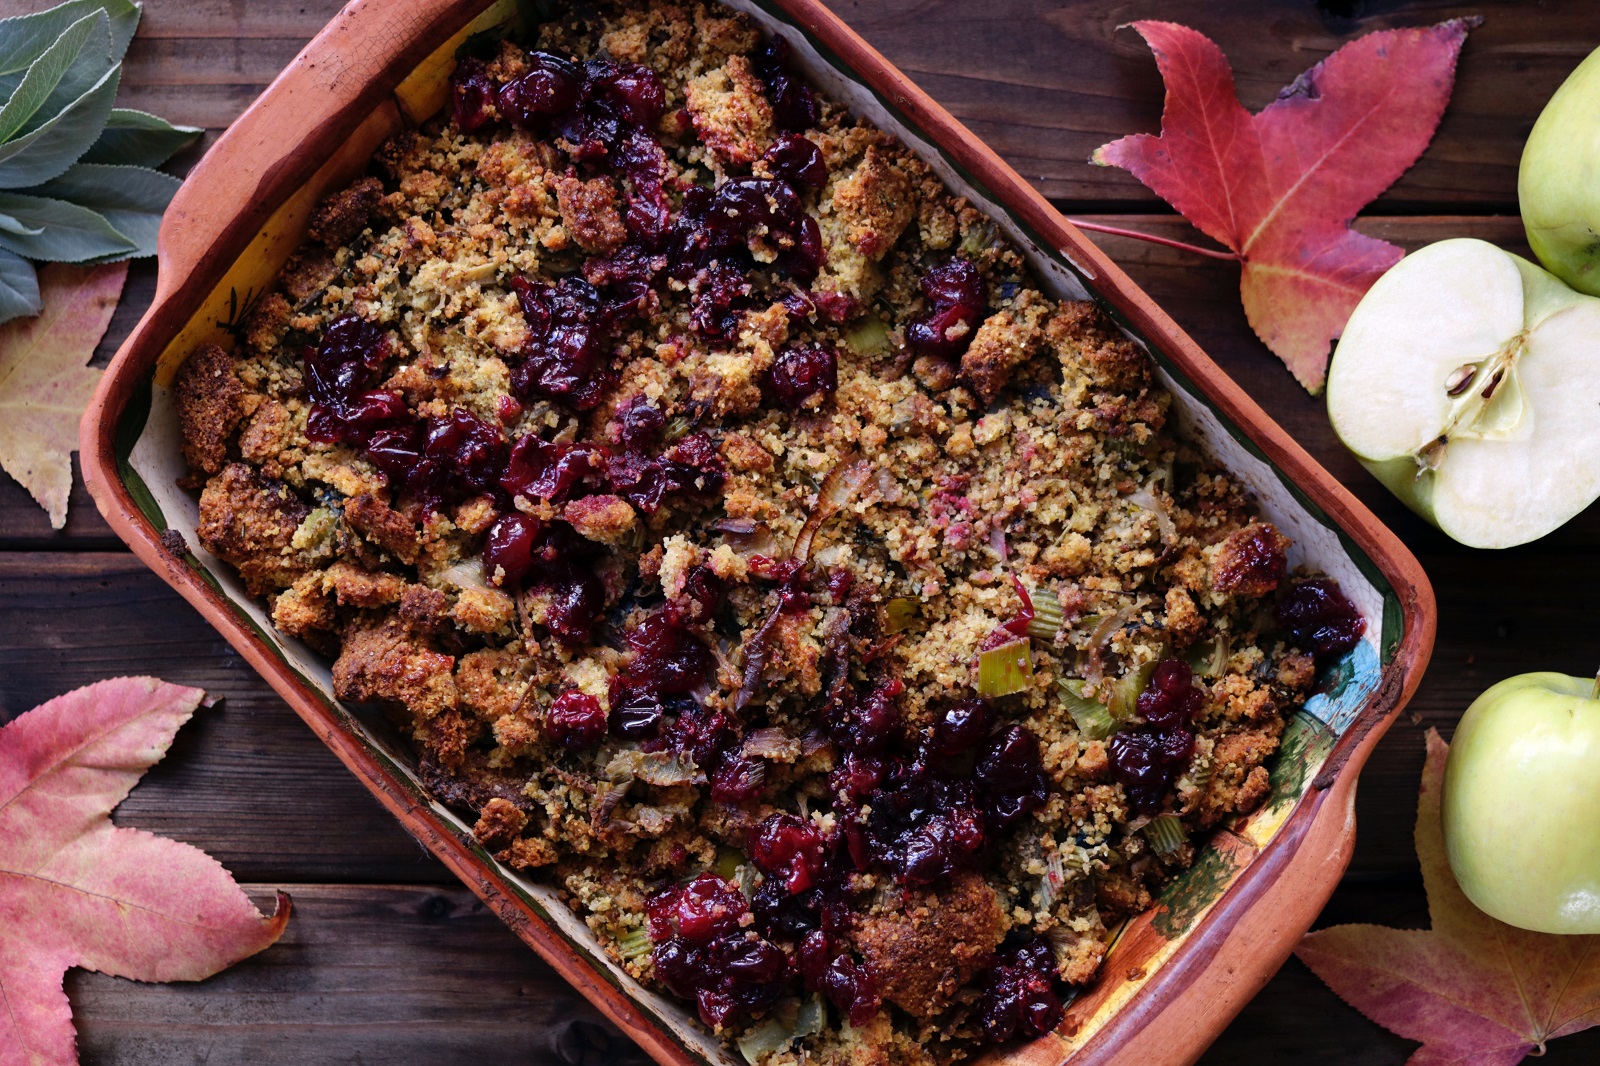 apple and raspberry crumble surrounded by maple leafs on rustic table